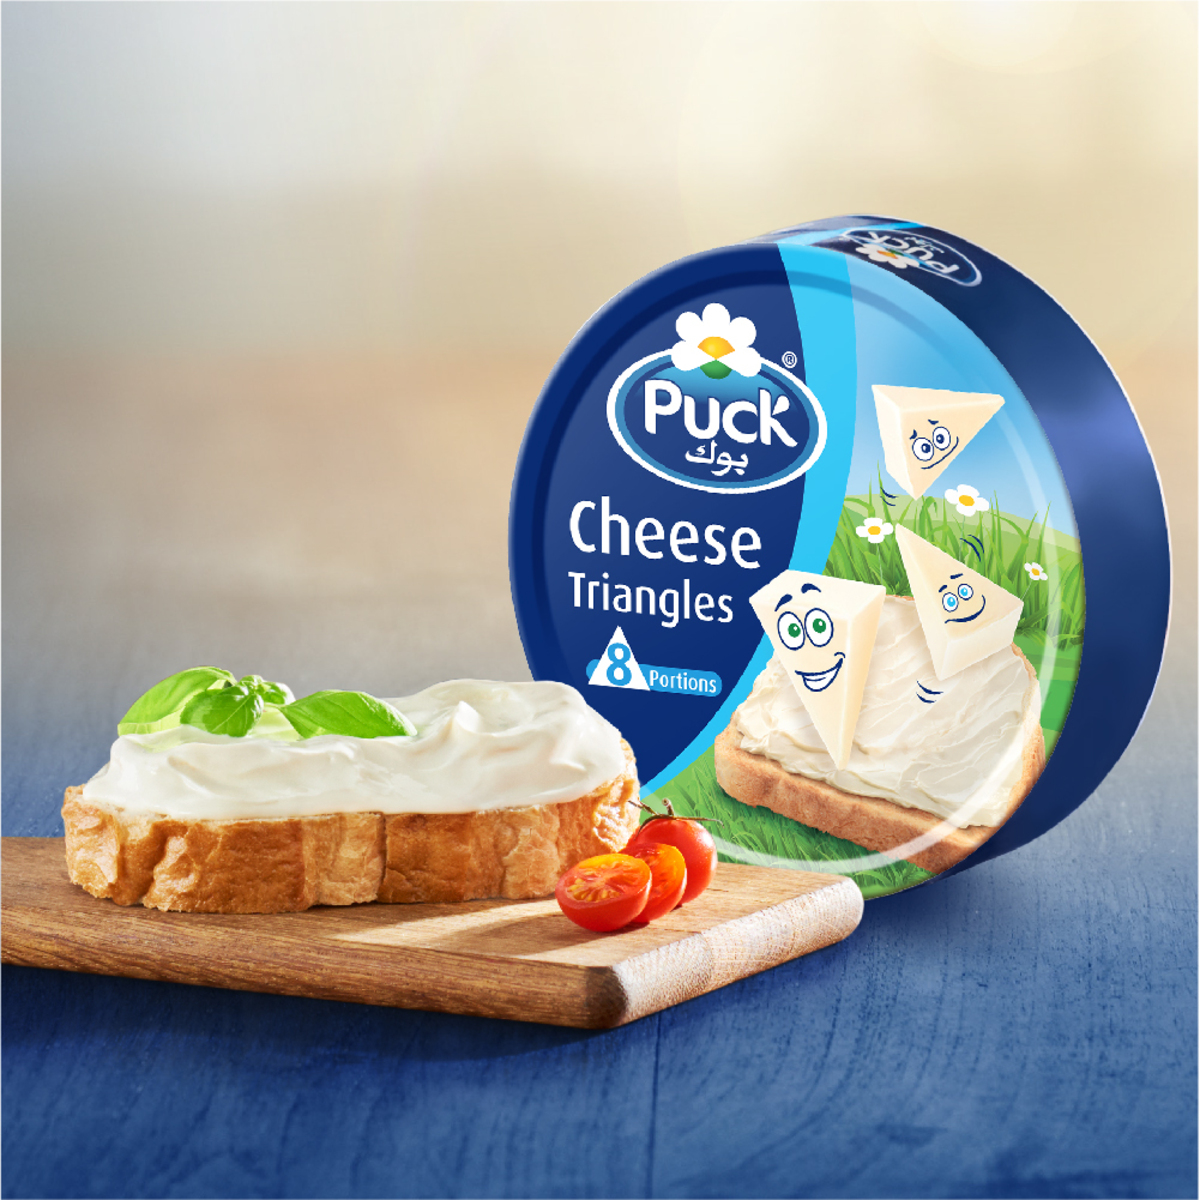 Puck Cheese Triangles 8 Portions 120 g